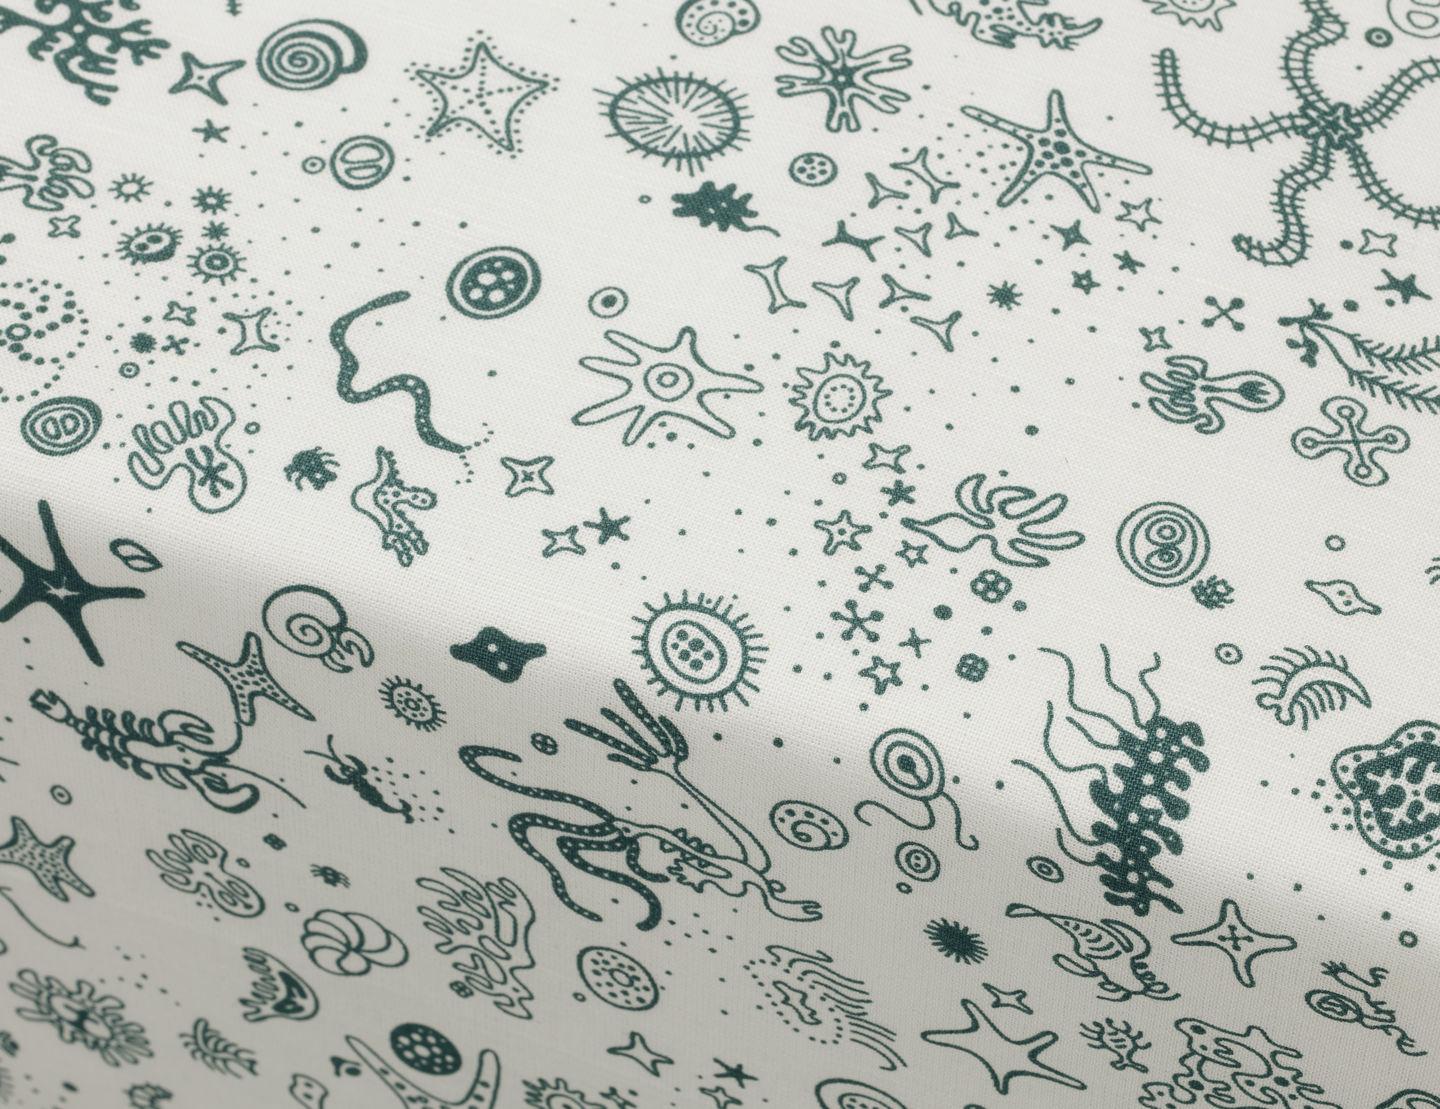 The expansive oeuvre of Charles and Ray Eames includes a large number of graphic designs, most of which were created by Ray Eames. Sea Things is a pattern she created in 1945. It shows a lovingly designed undersea world. Material: cotton-linen